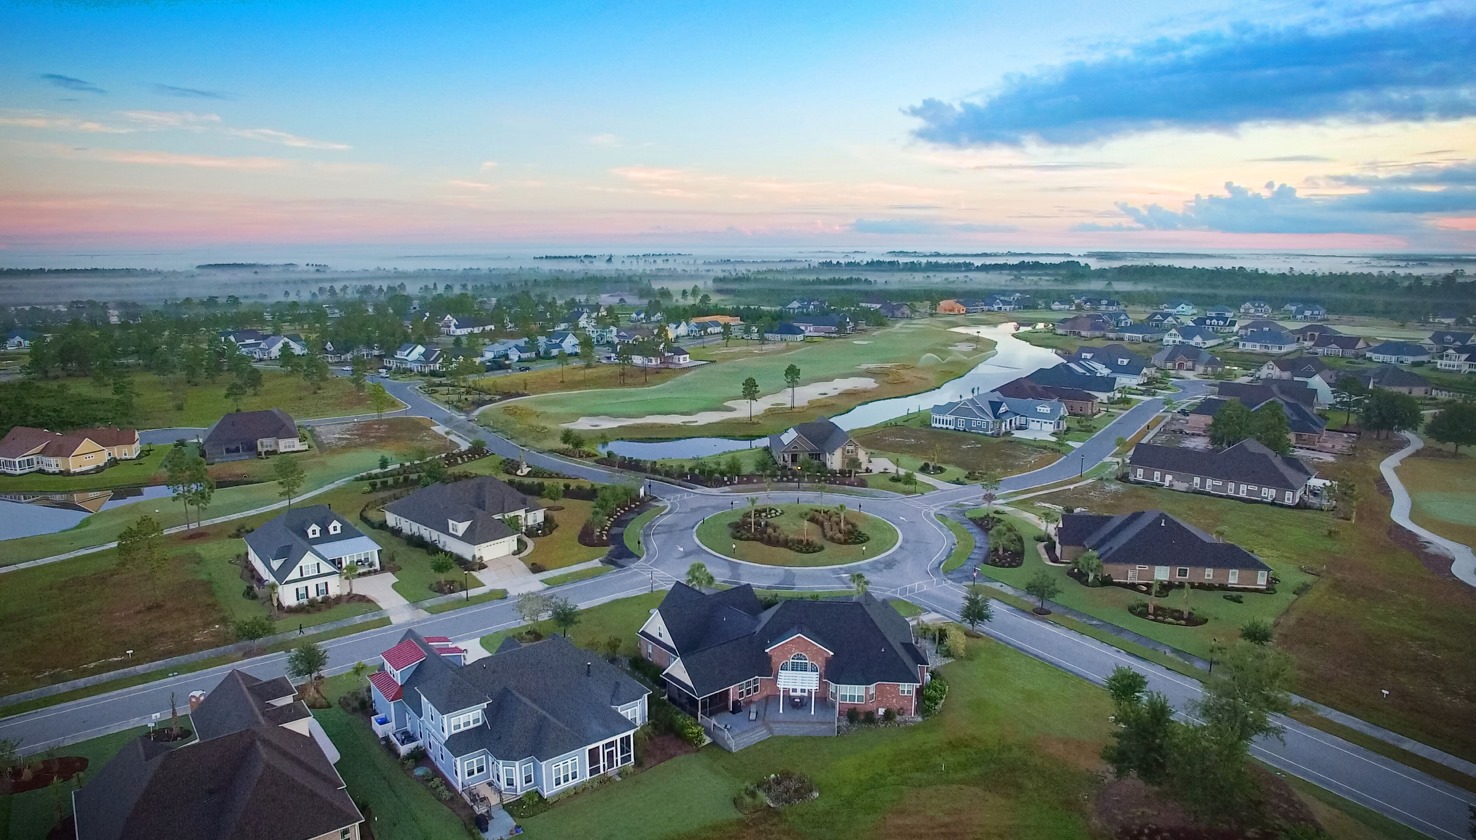 Compass Pointe Homes for Sale – Neighborhood Update April 2021